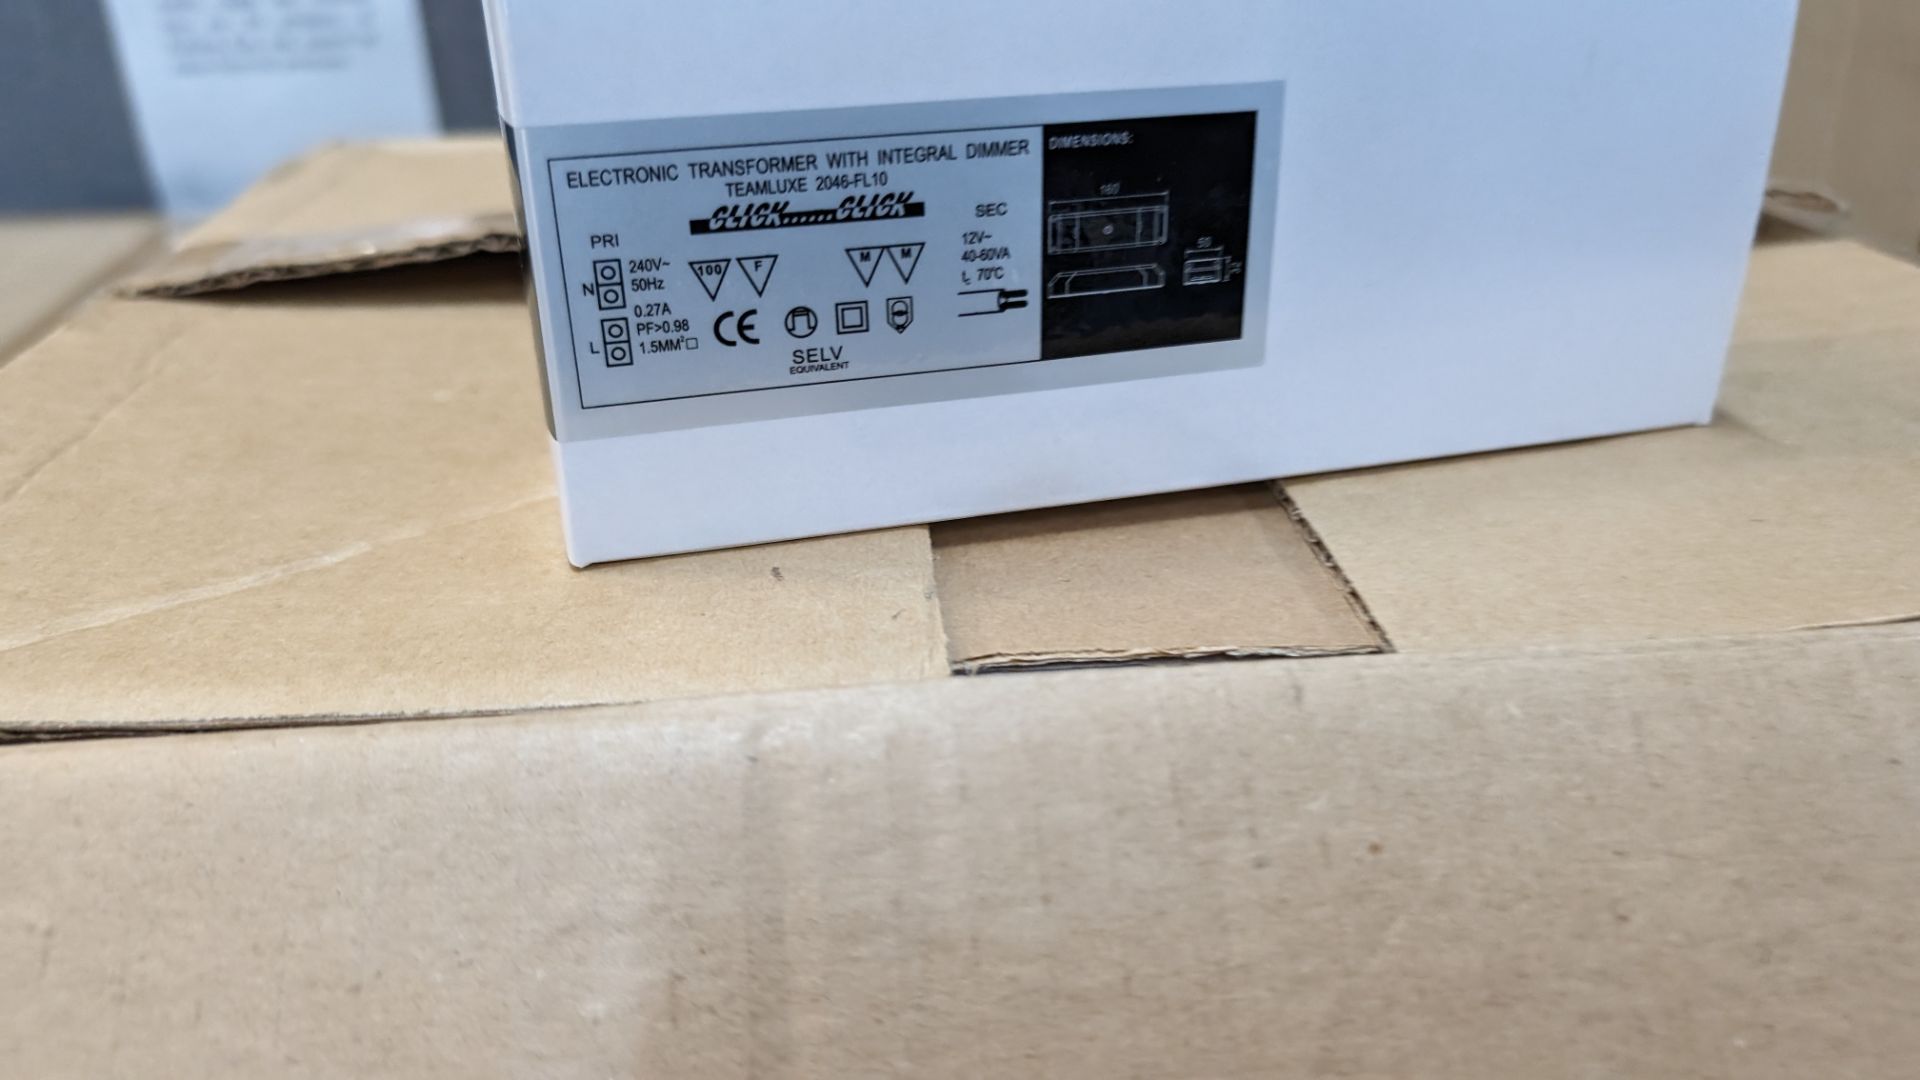 240 off Teamluxe electronic transformers with integral dimmer (3 outer cartons) - Image 3 of 7